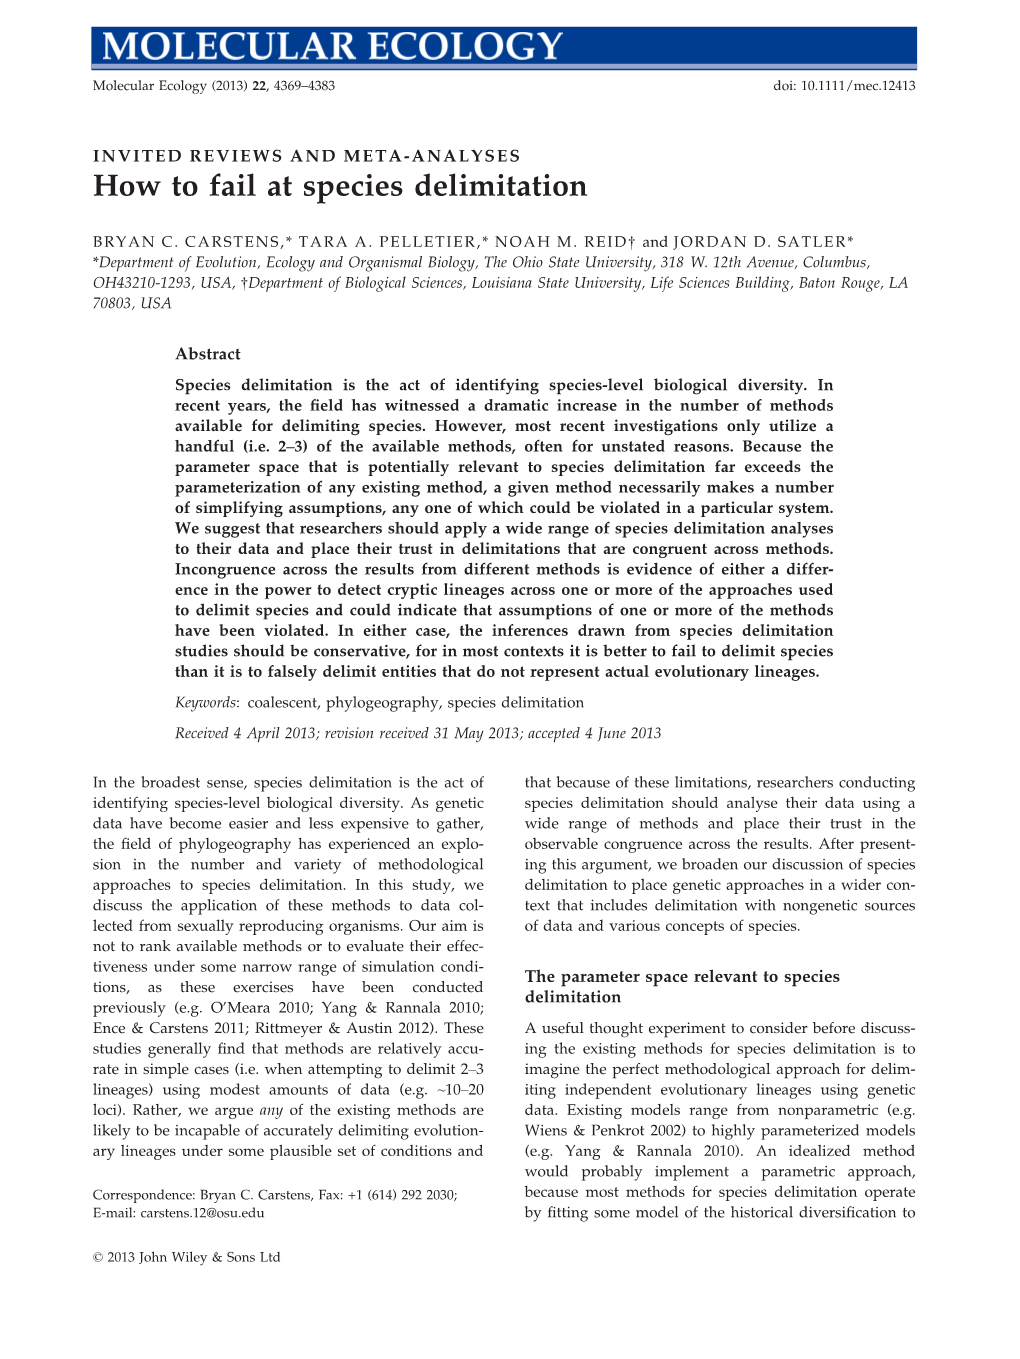 How to Fail at Species Delimitation